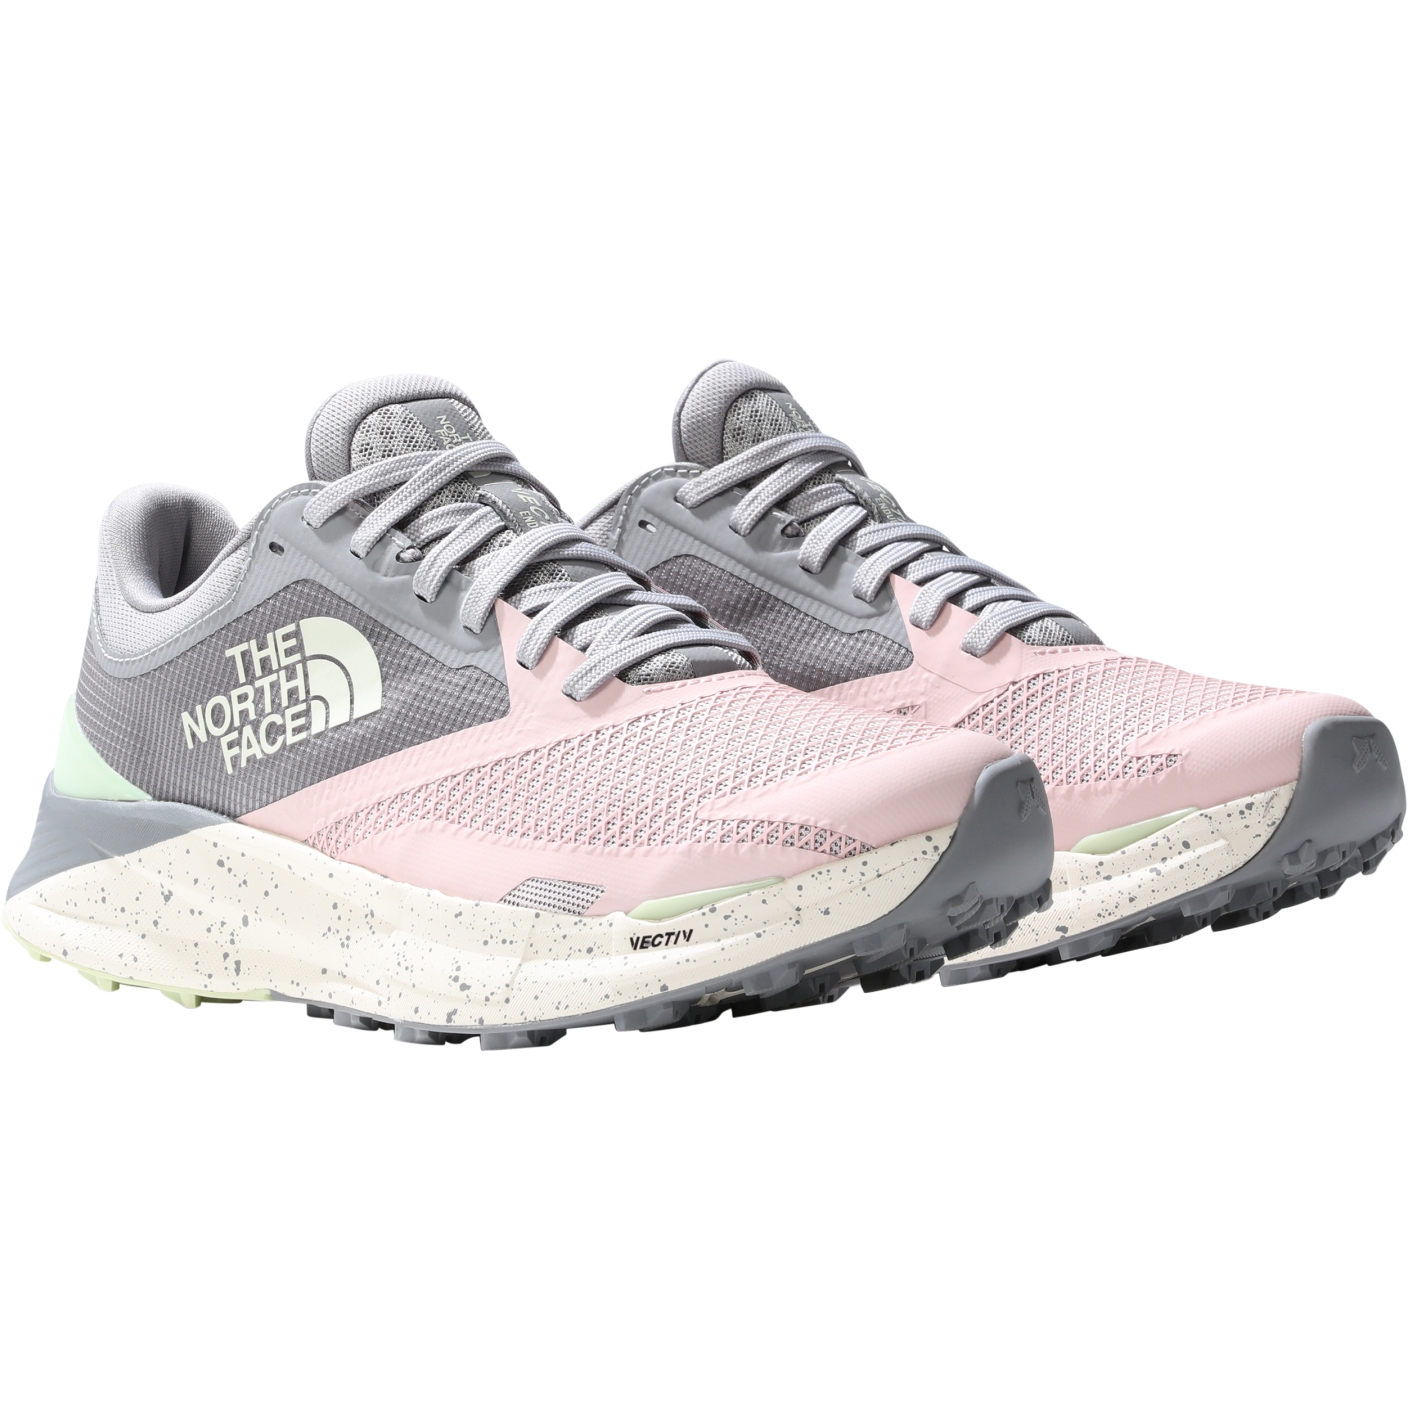 Picture of The North Face VECTIV™ Enduris III Trail Running Shoes Women - Purdy Pink/Meld Grey